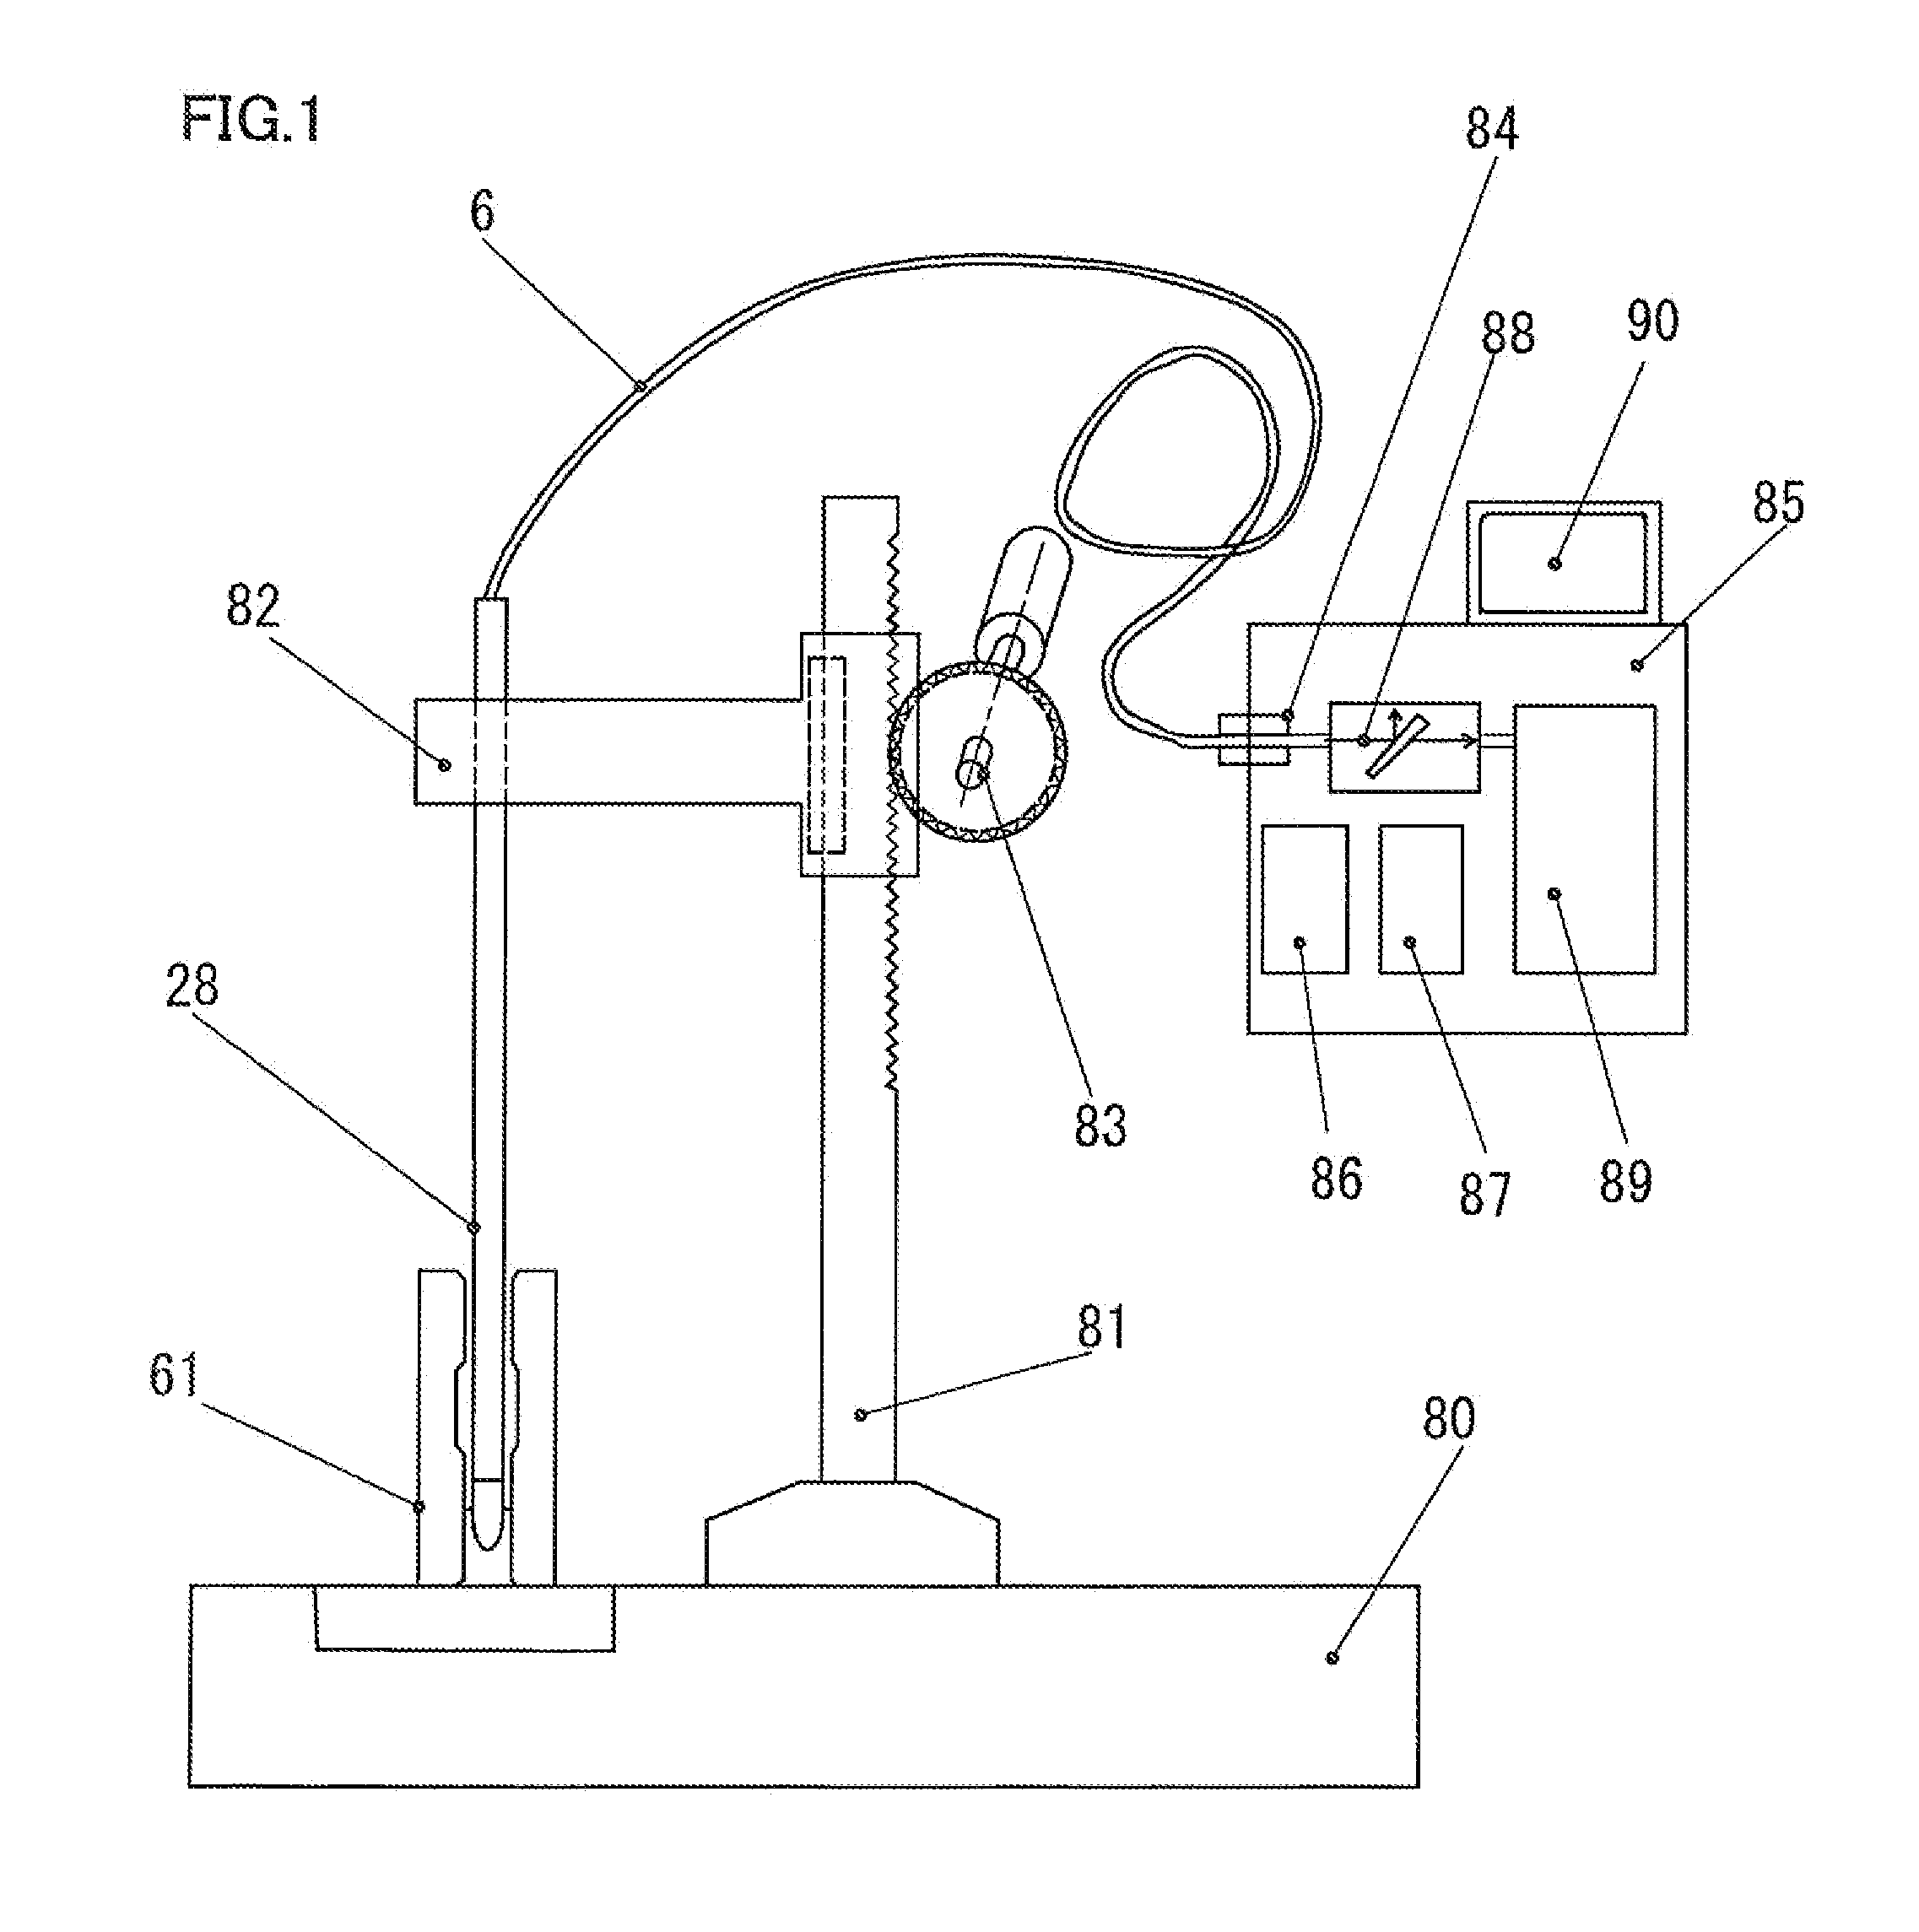 Optical inner surface measuring device